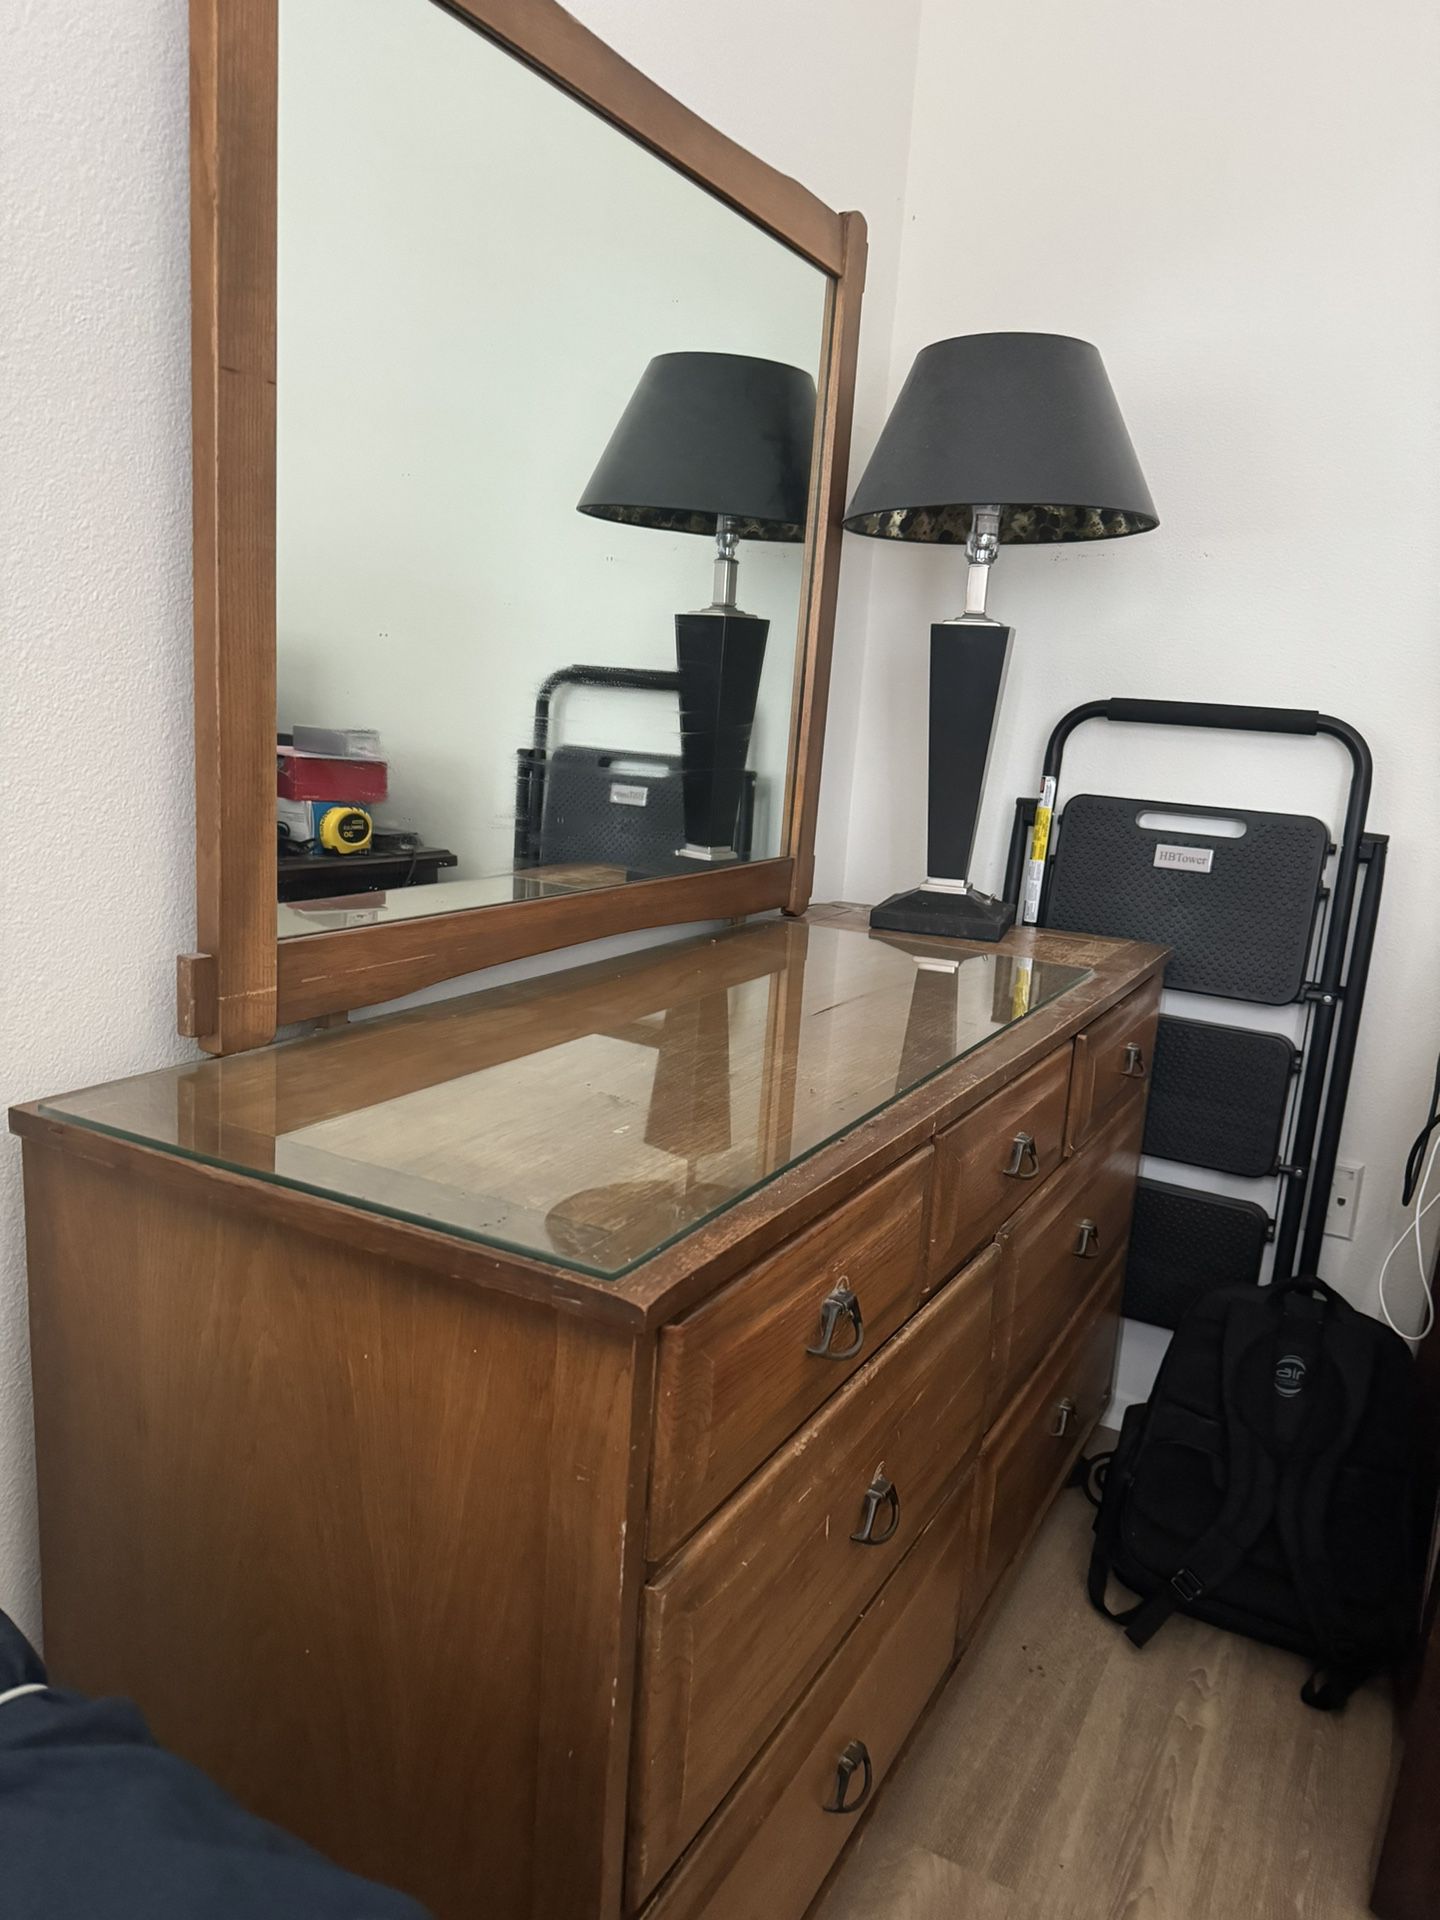 Oak Wood Bedroom Furniture - Chest Of drawers And Dresser With Mirror